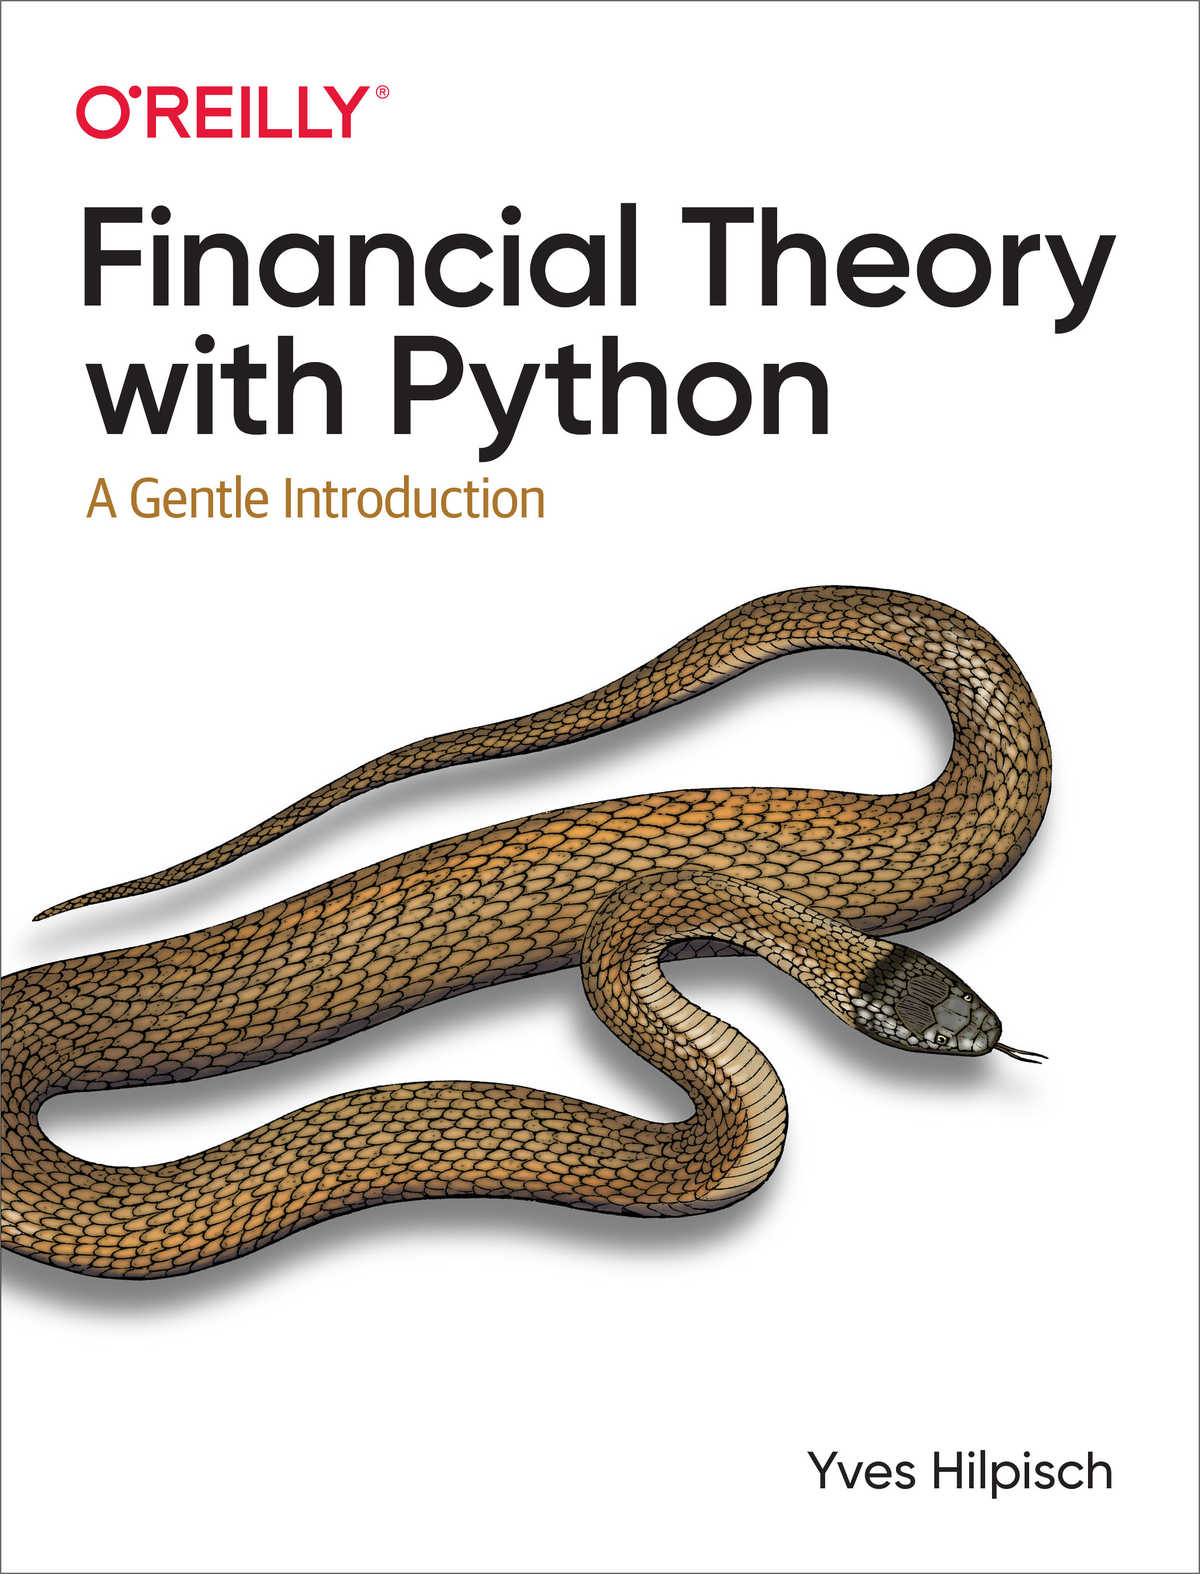 Financial Theory with Python by Yves Hilpisch Copyright 2022 Yves Hilpisch - photo 1